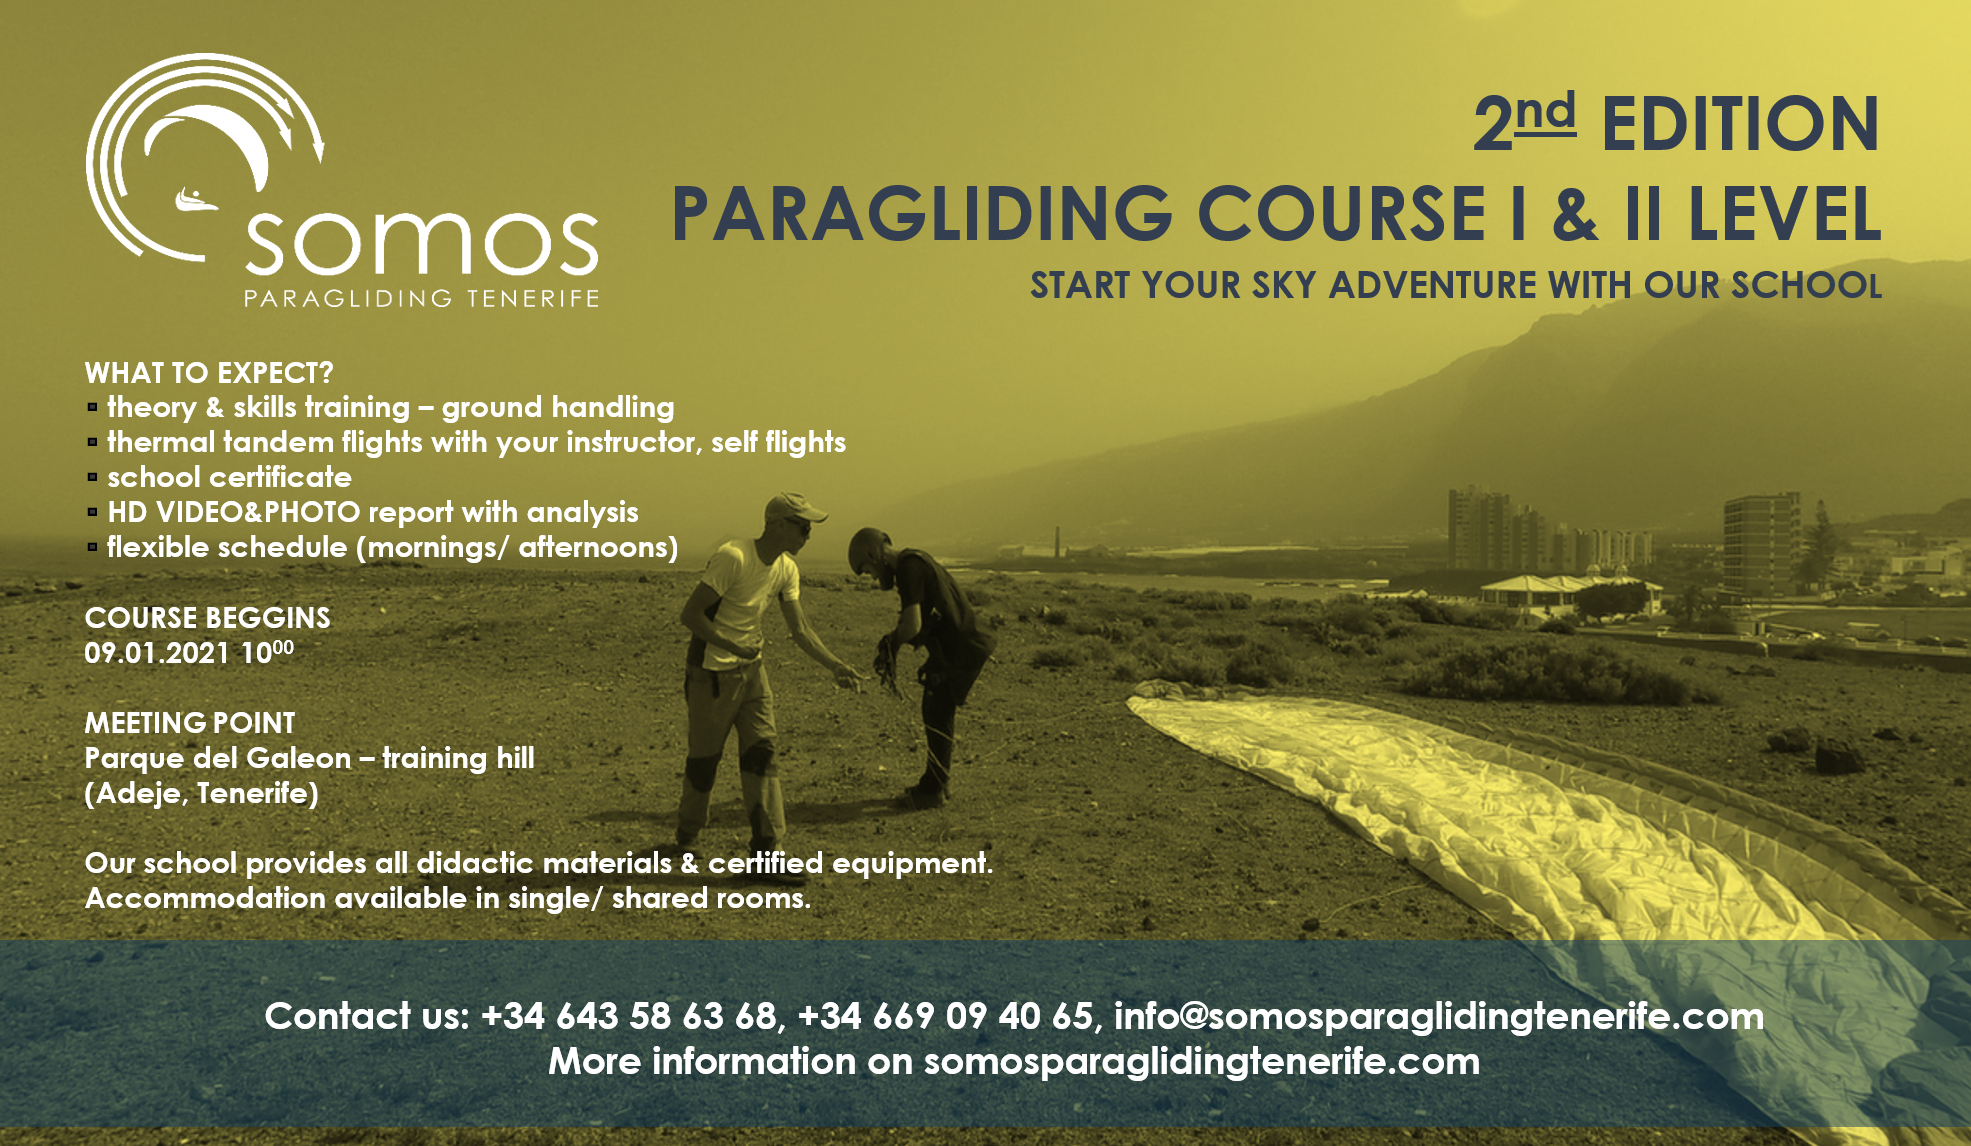 PARAGLIDING COURSE I & II LEVEL - 2nd Edition